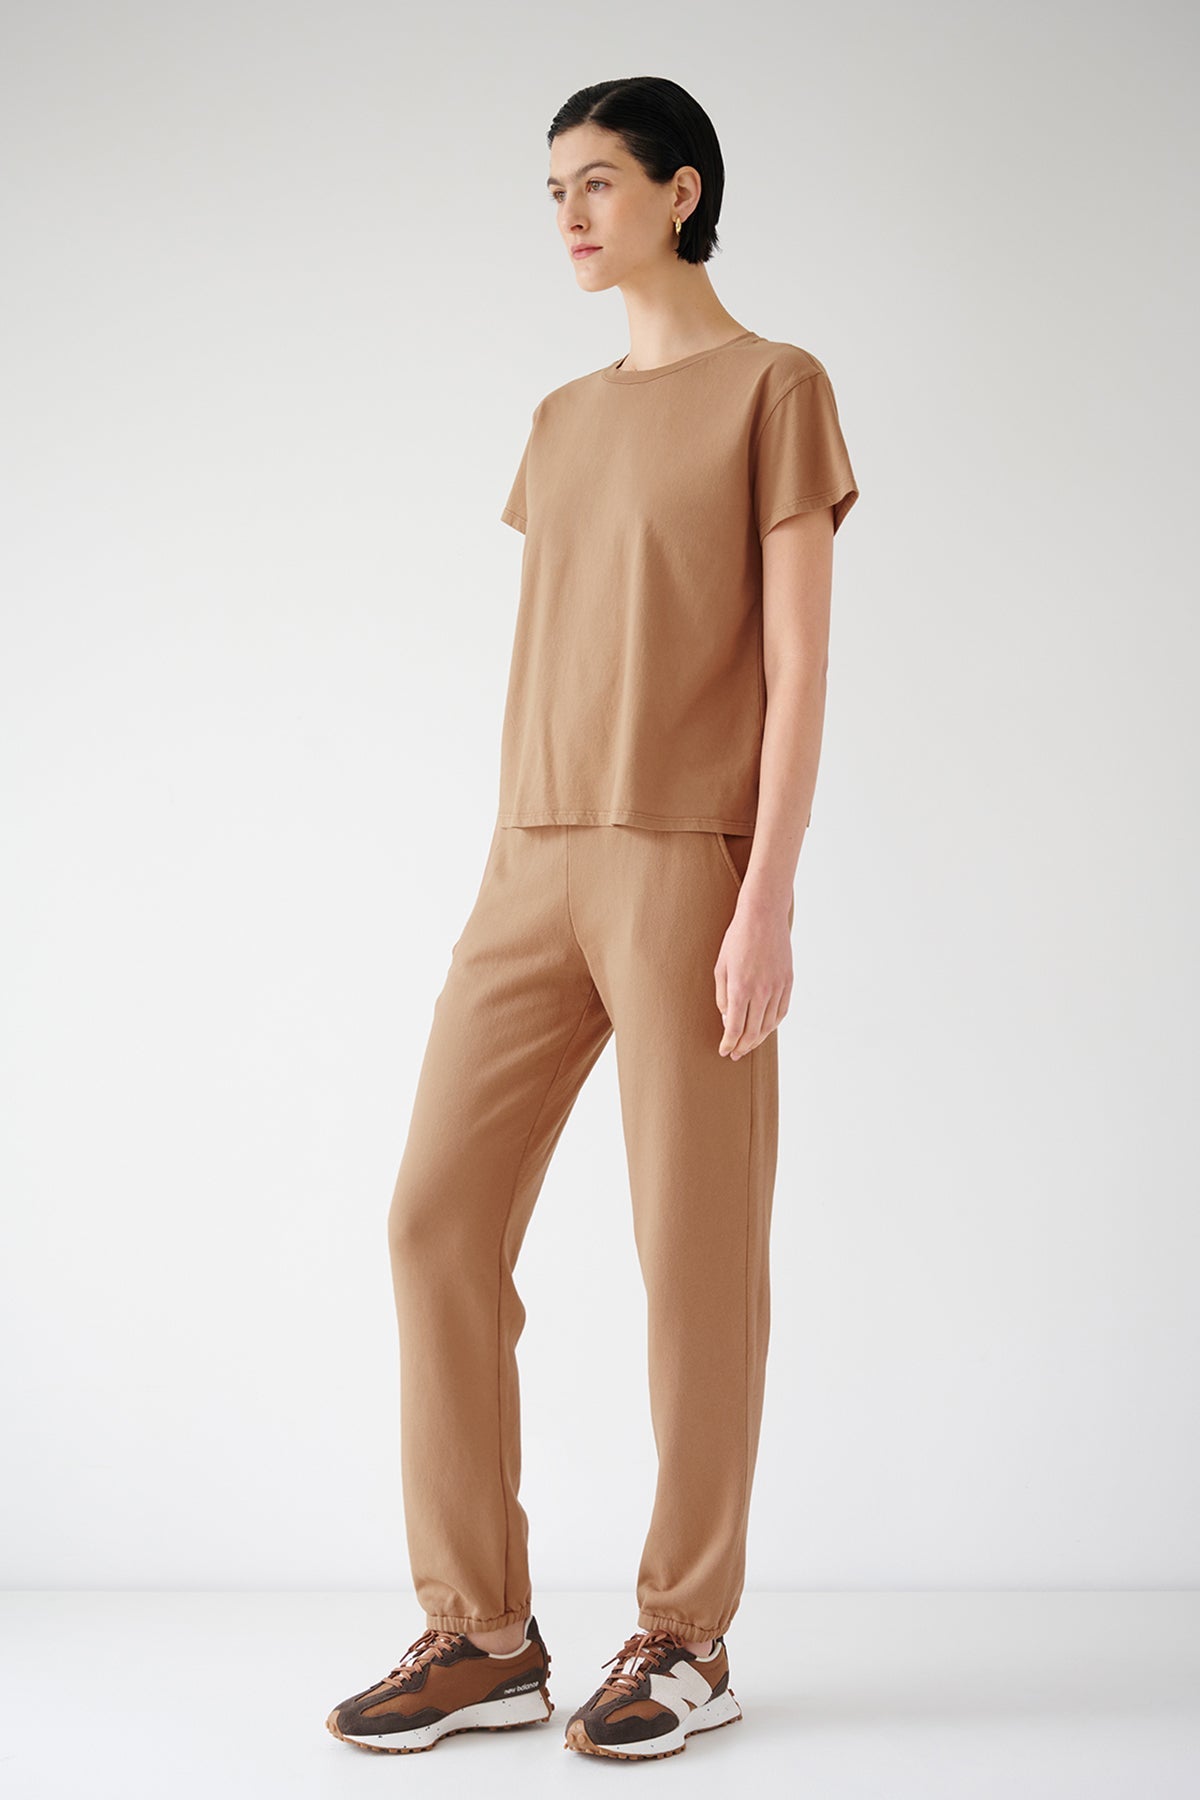 The model is wearing a tan t-shirt and Velvet by Jenny Graham ZUMA SWEATPANT.-36594727682241